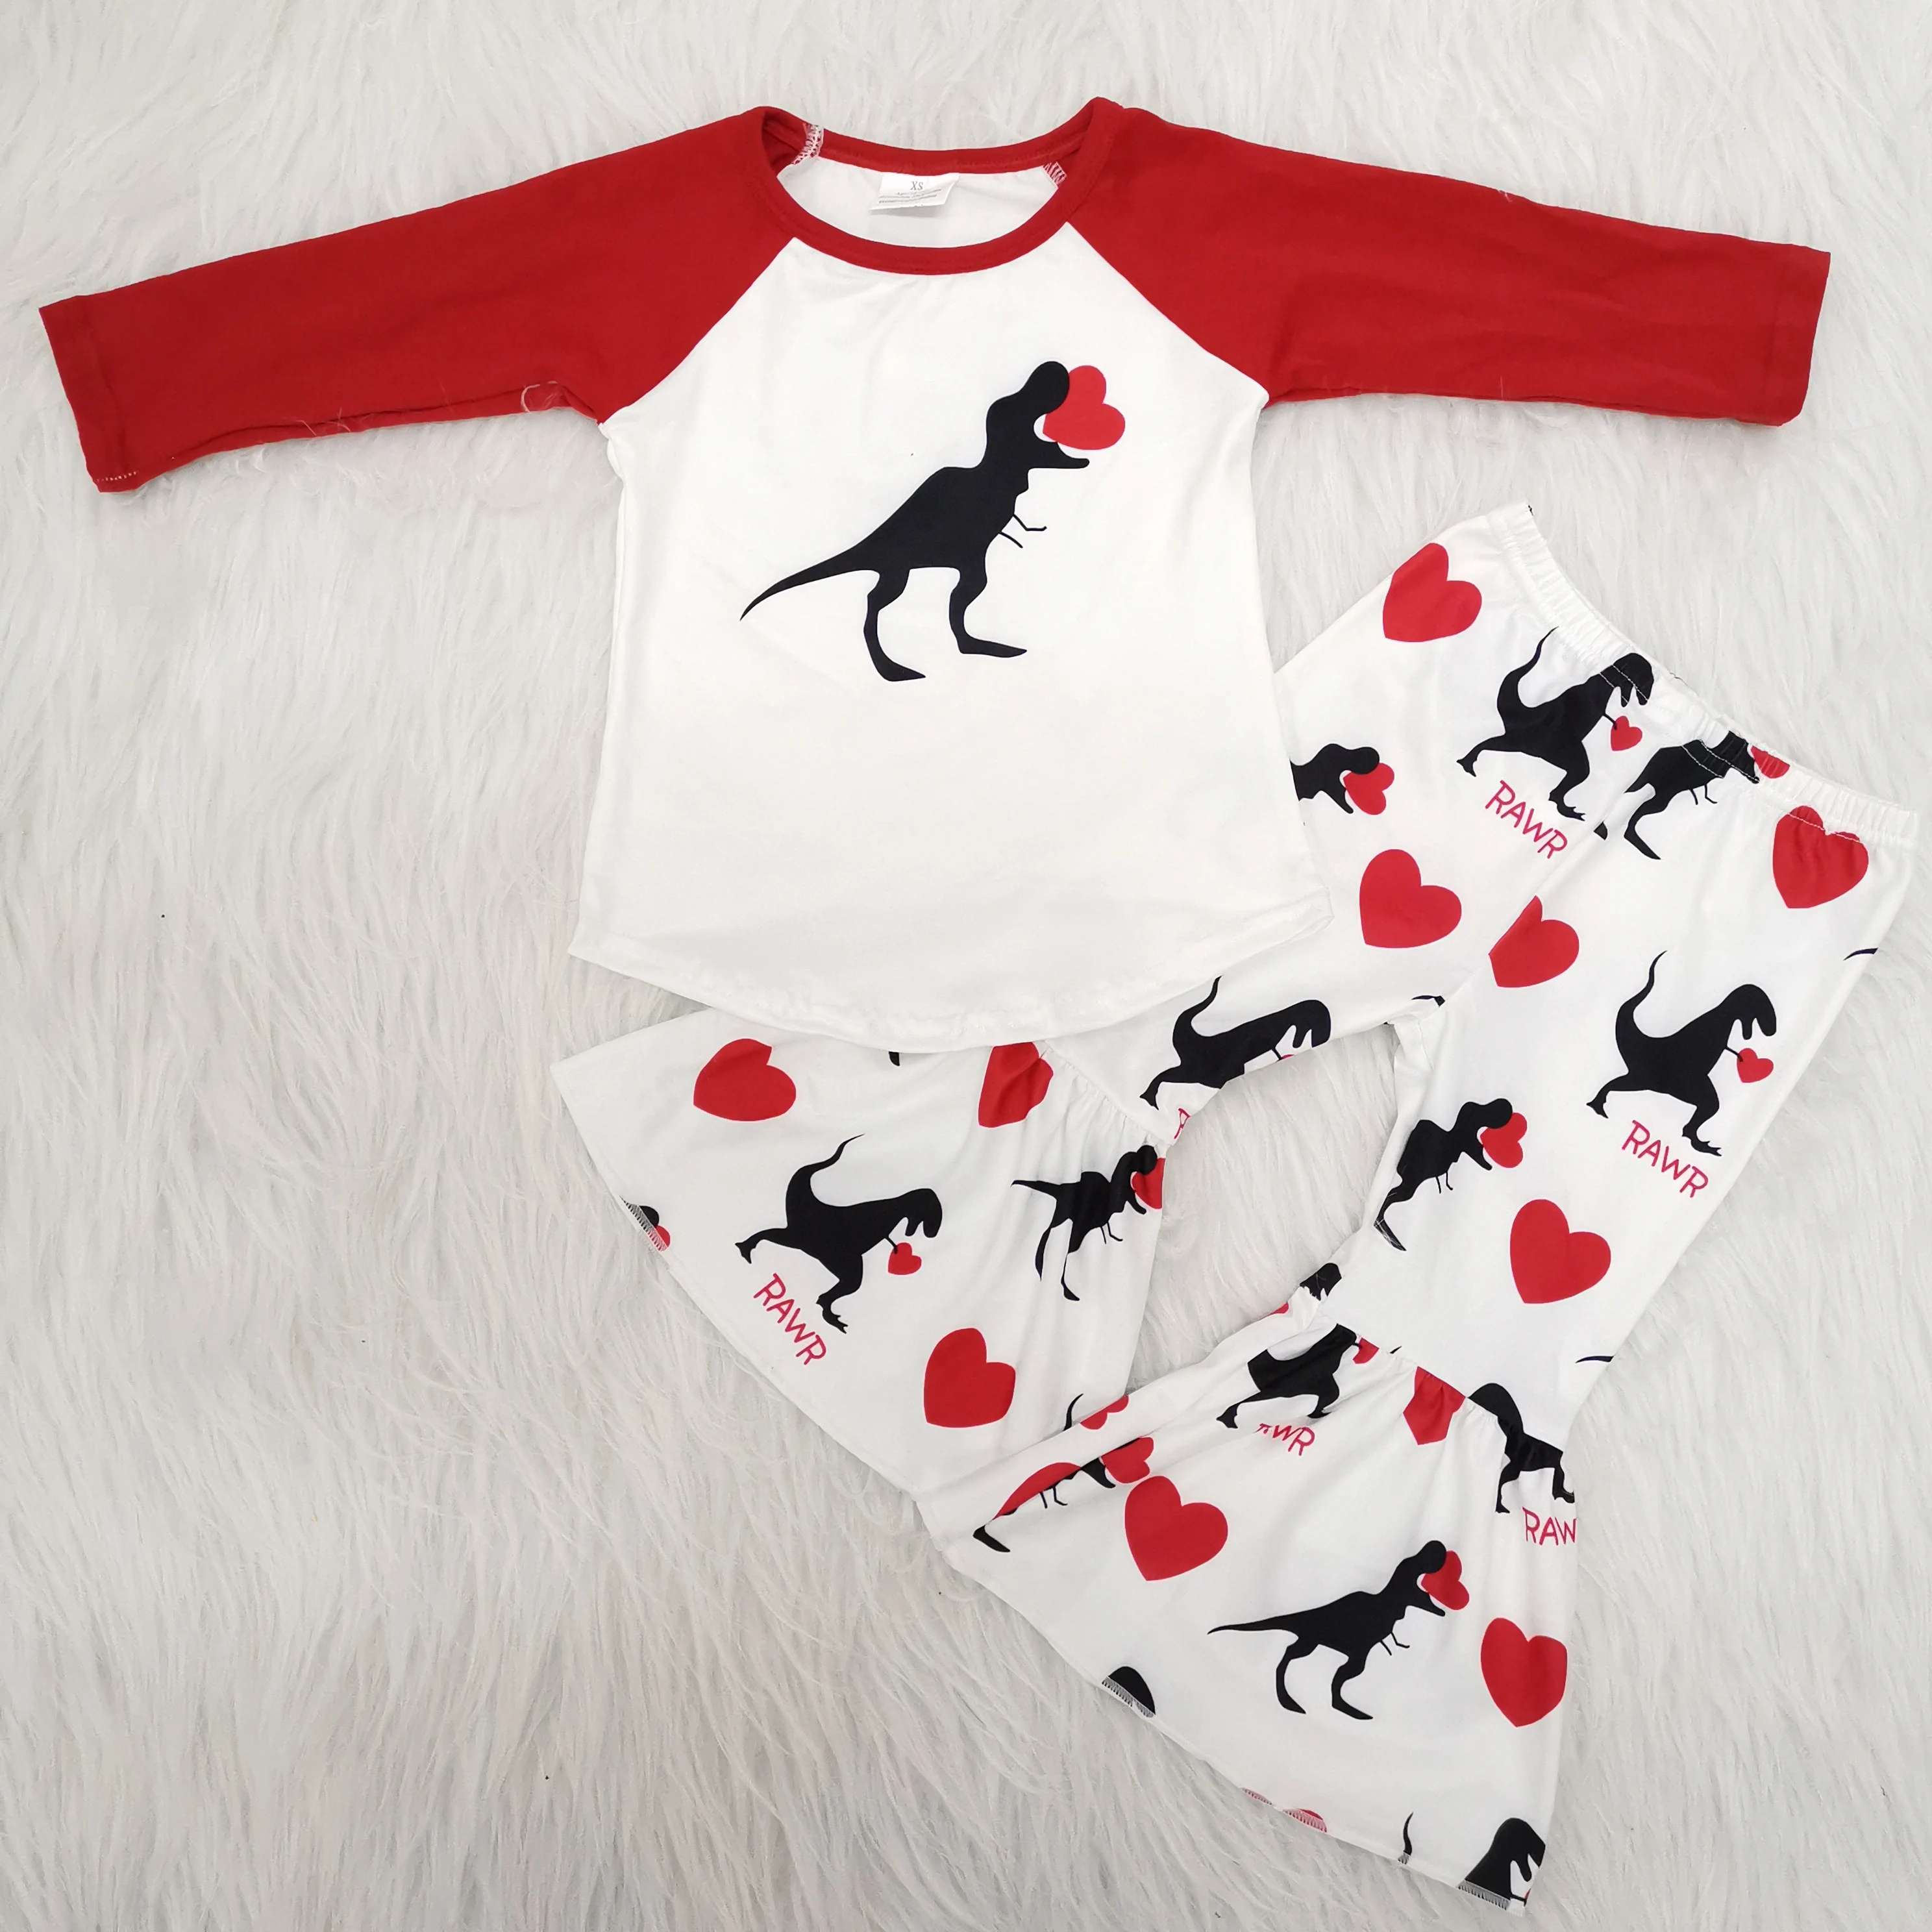 

High Quality Baby Girls Boutique Outfits Dinosaur Red Love Heart Valentine's Day Clothes Fashion Kids Fall Winter 2PCS RTS Set